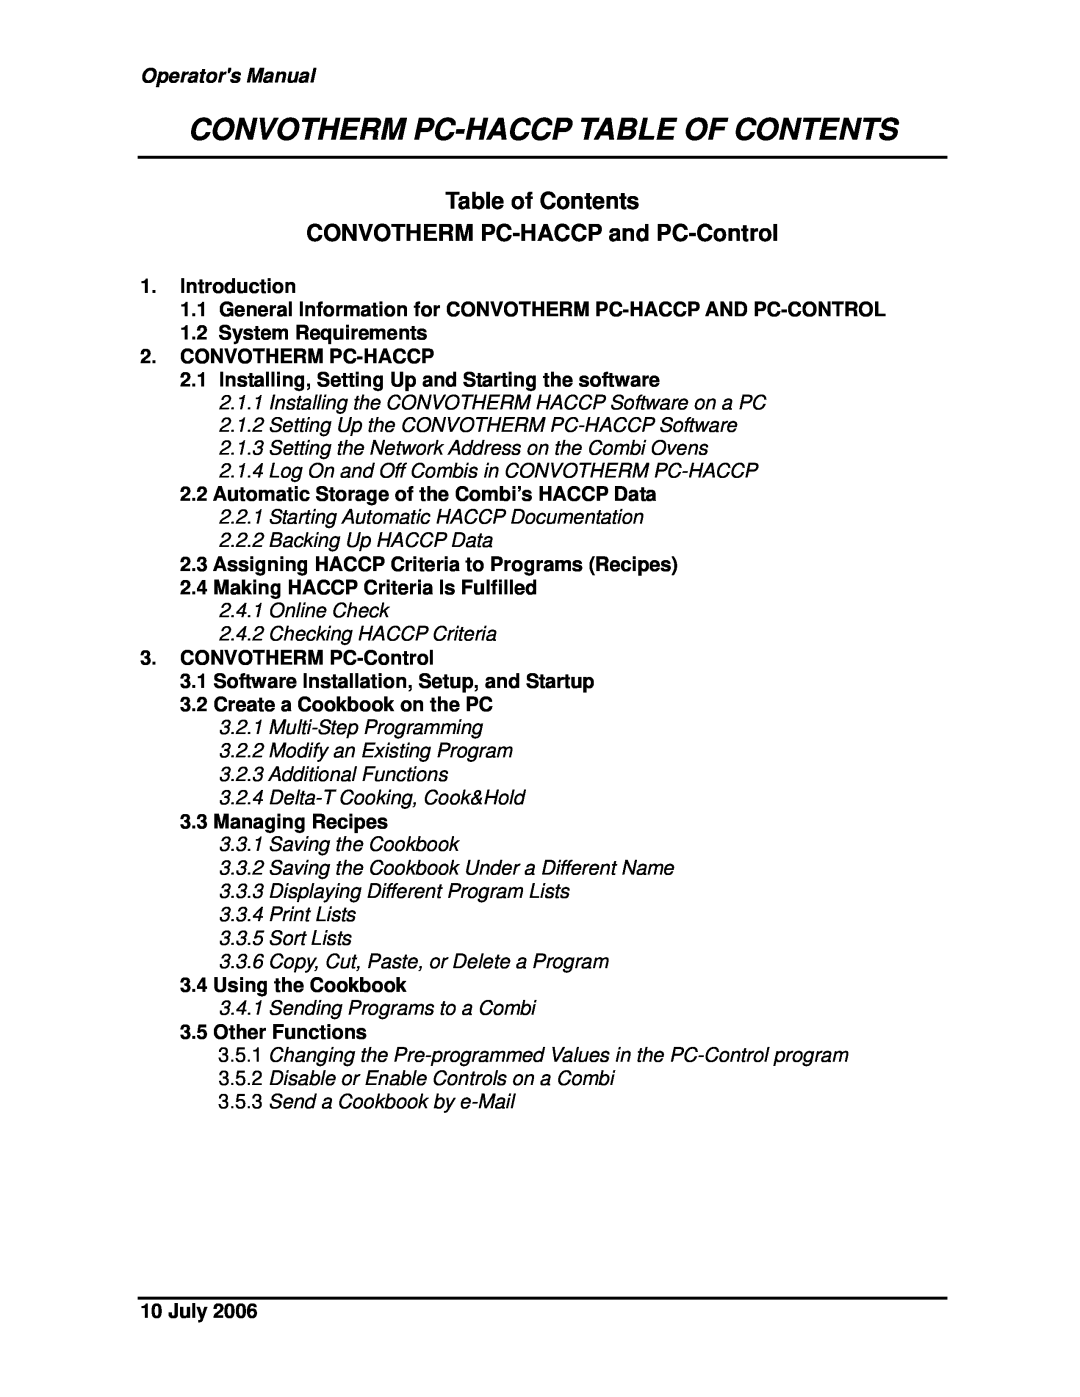 Cleveland Range Convotherm Pc-Haccp Table Of Contents, Table of Contents CONVOTHERM PC-HACCP and PC-Control, July 